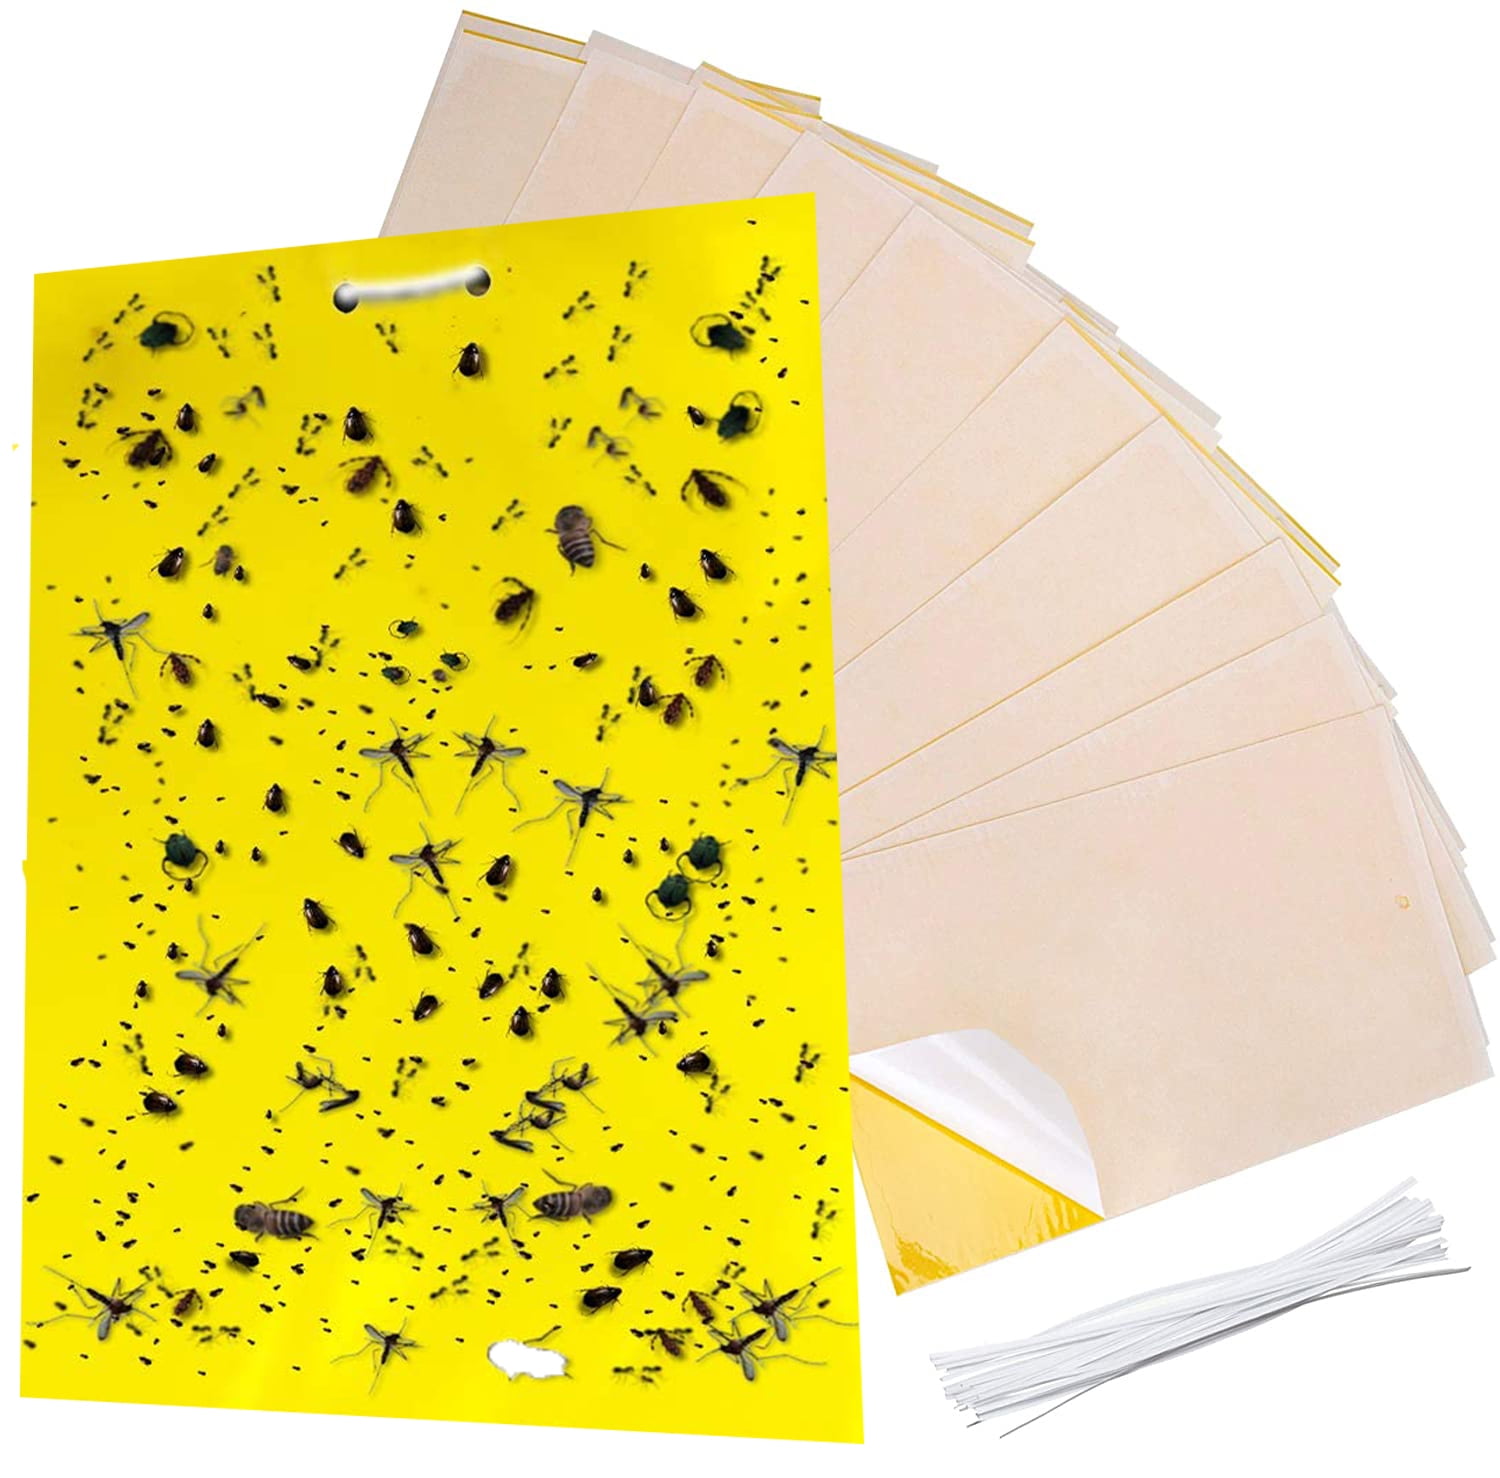 10PCS Dual-Sided Yellow Sticky Traps for Flying Plant Insect Like Fungus Gnat US 